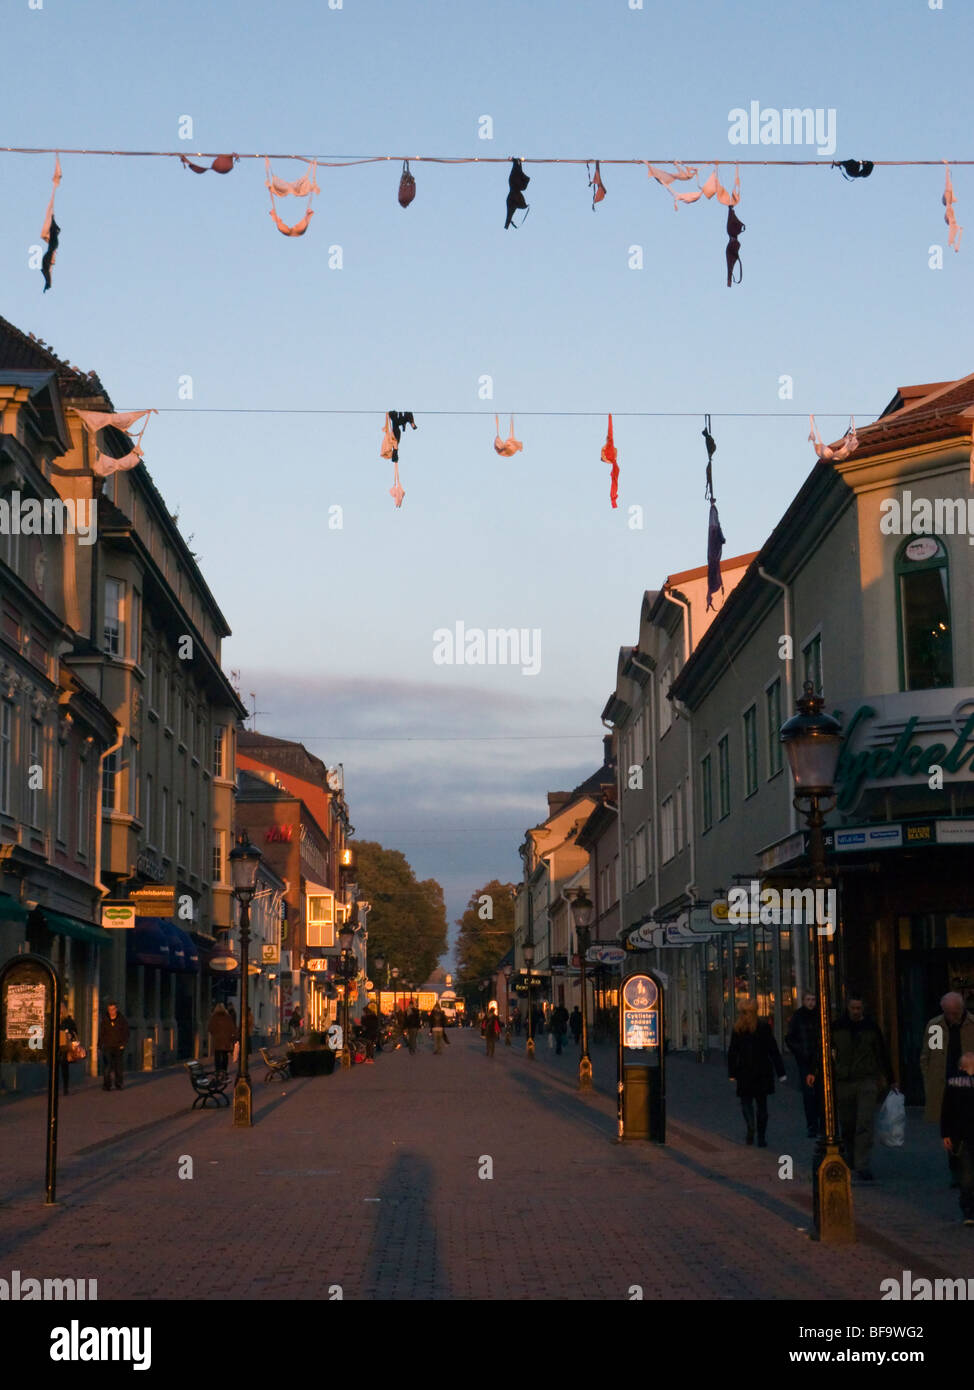 Bras hanging above a street in Nyköping, Sweden. Part of a Pink Ribbon jippo. Stock Photo